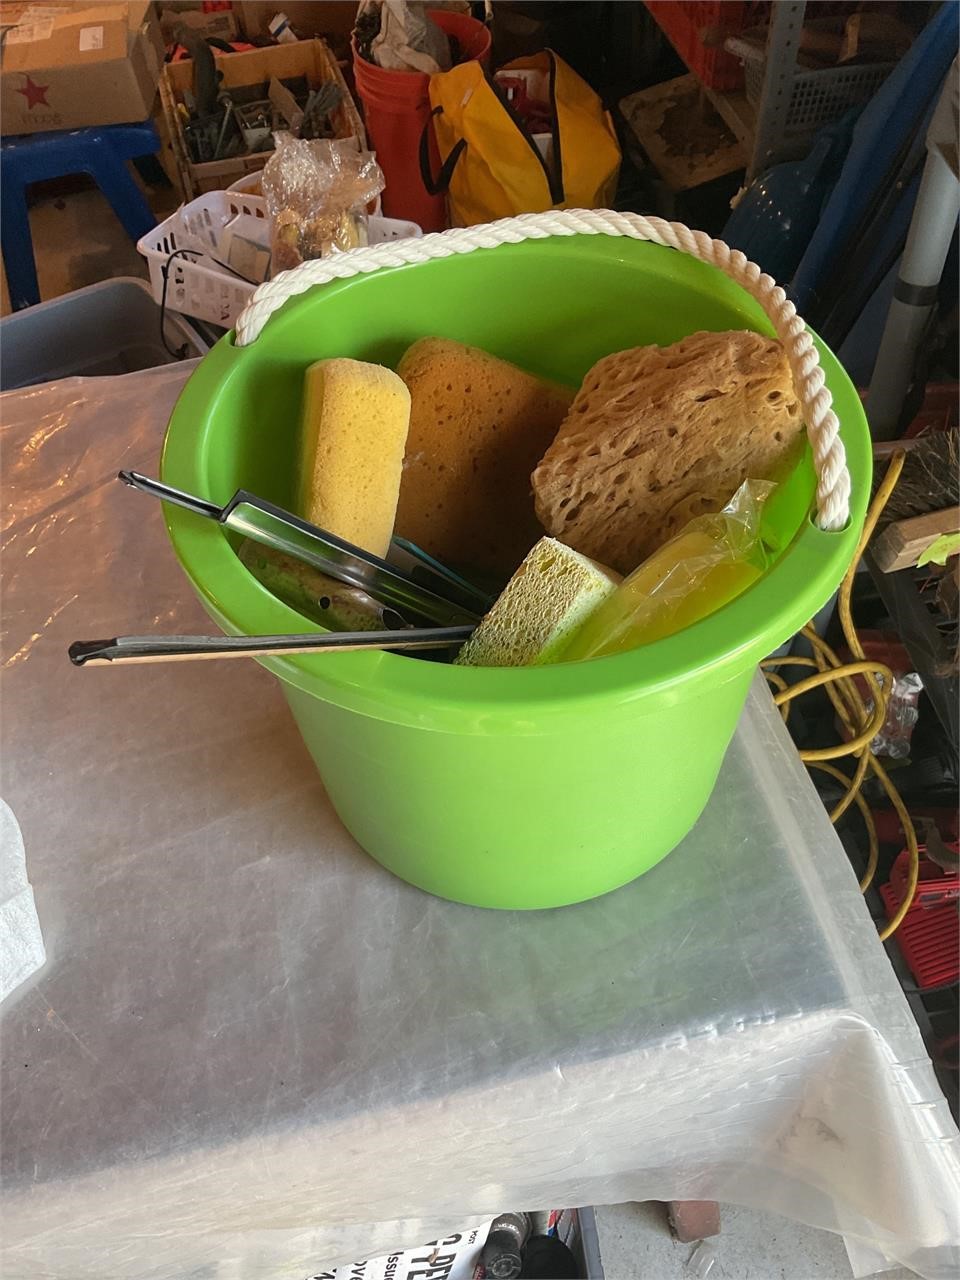 Bucket lot of sponges and squeegees